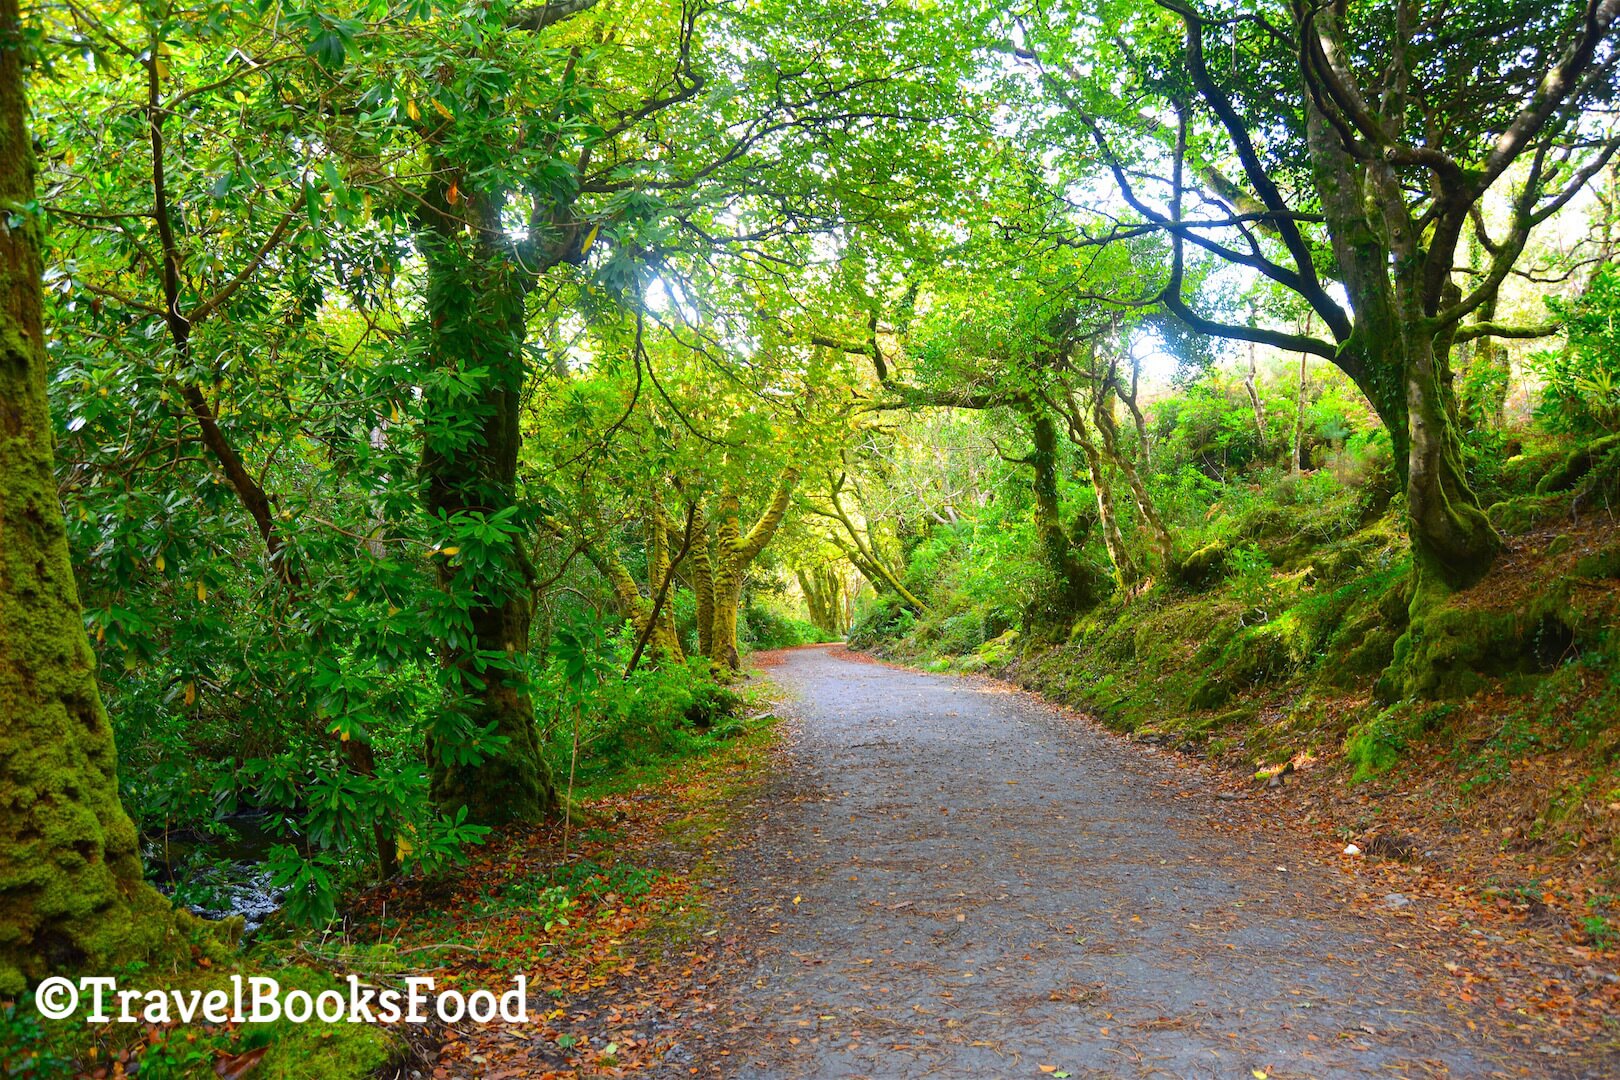 A tropical paradise in Kells, Ireland. Lots of trees surrounding an isolated path